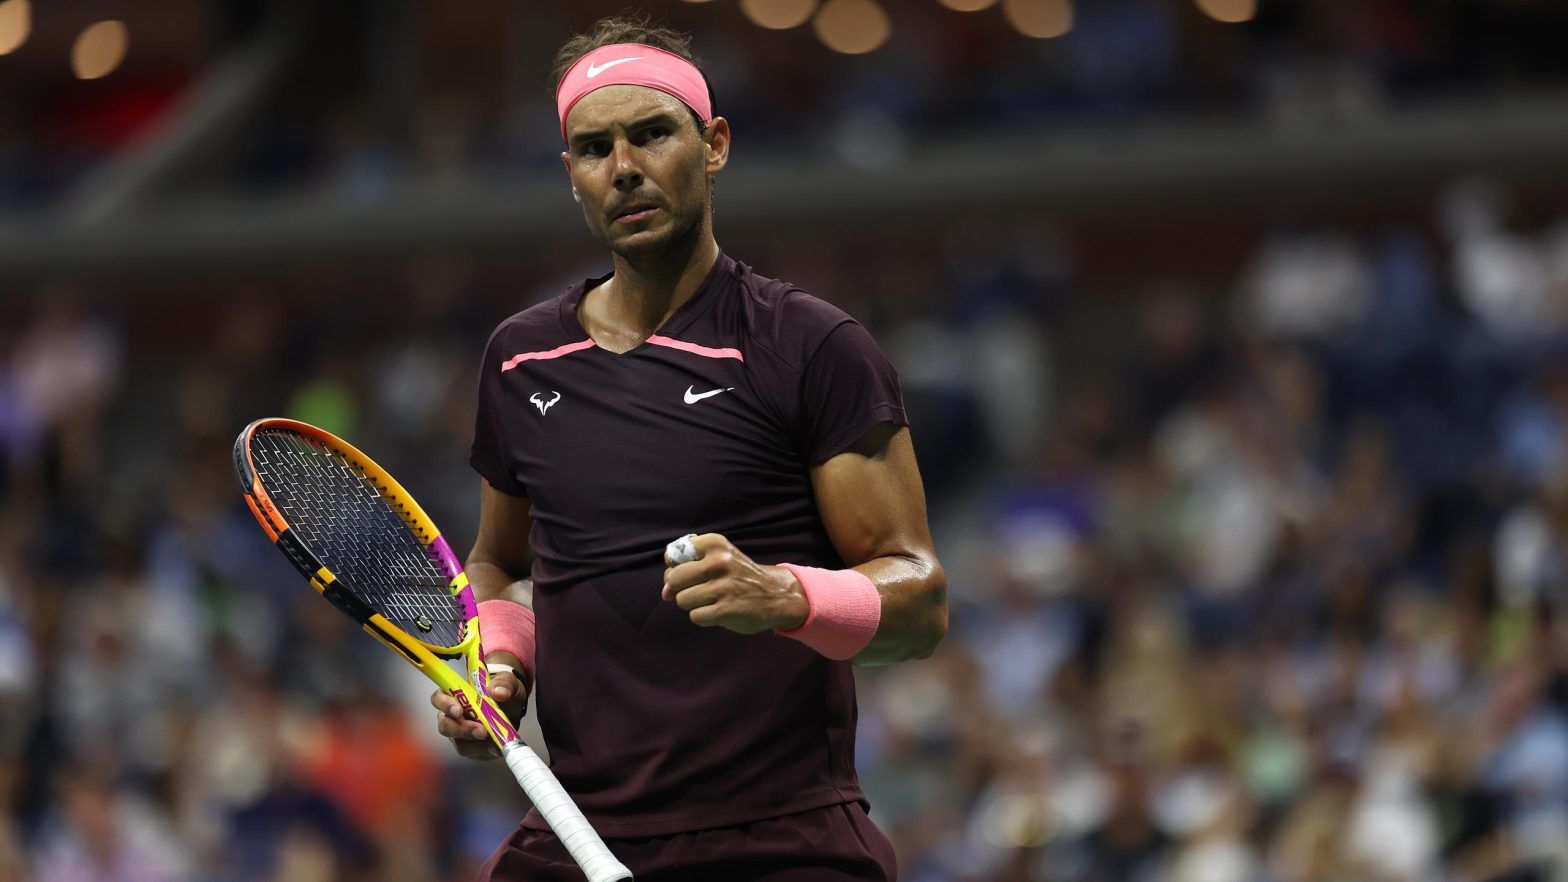 Nadal vs Gasquet LIVE: Rafael Nadal eyes safe passage into round 4 against Frenchman Richard Gasquet, aims to extend 17-0 record at US Open - Follow US Open 2022 LIVE